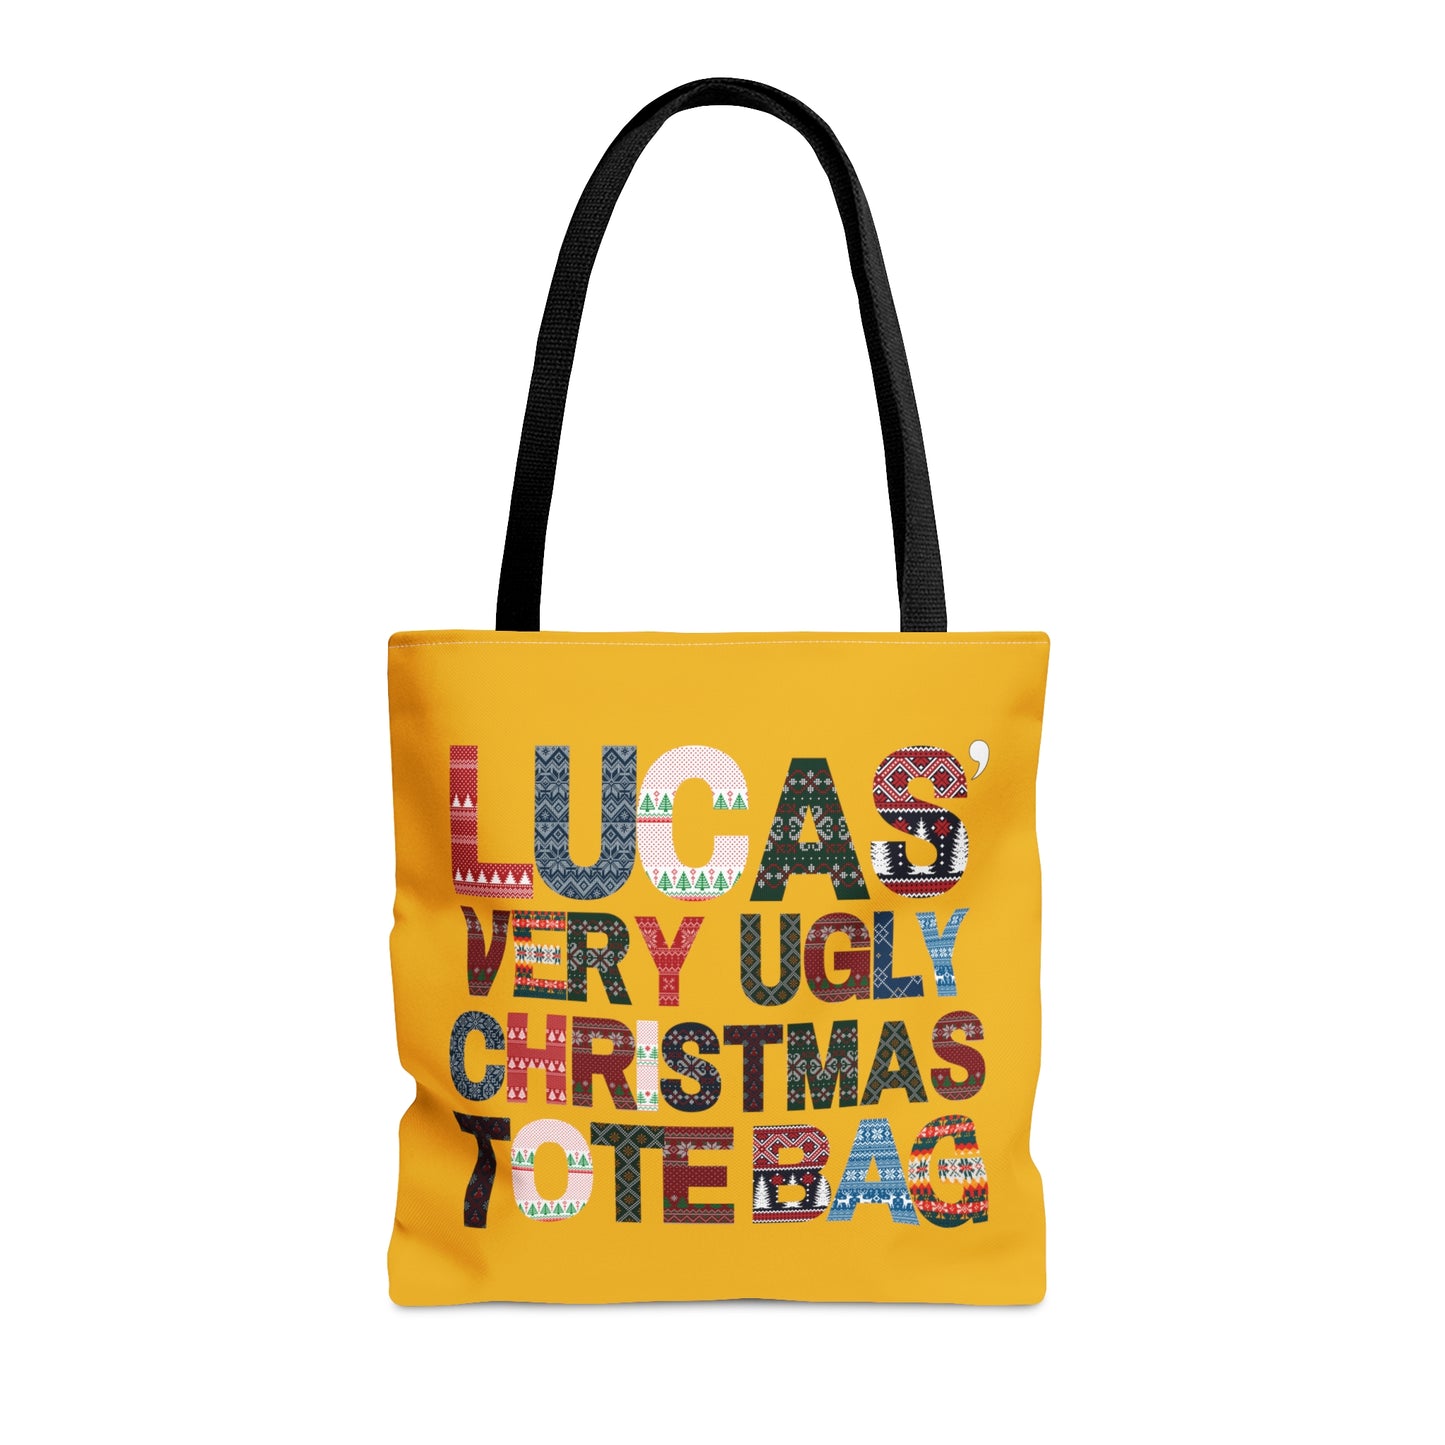 Very Ugly Christmas Sweater Personalized Tote Bag